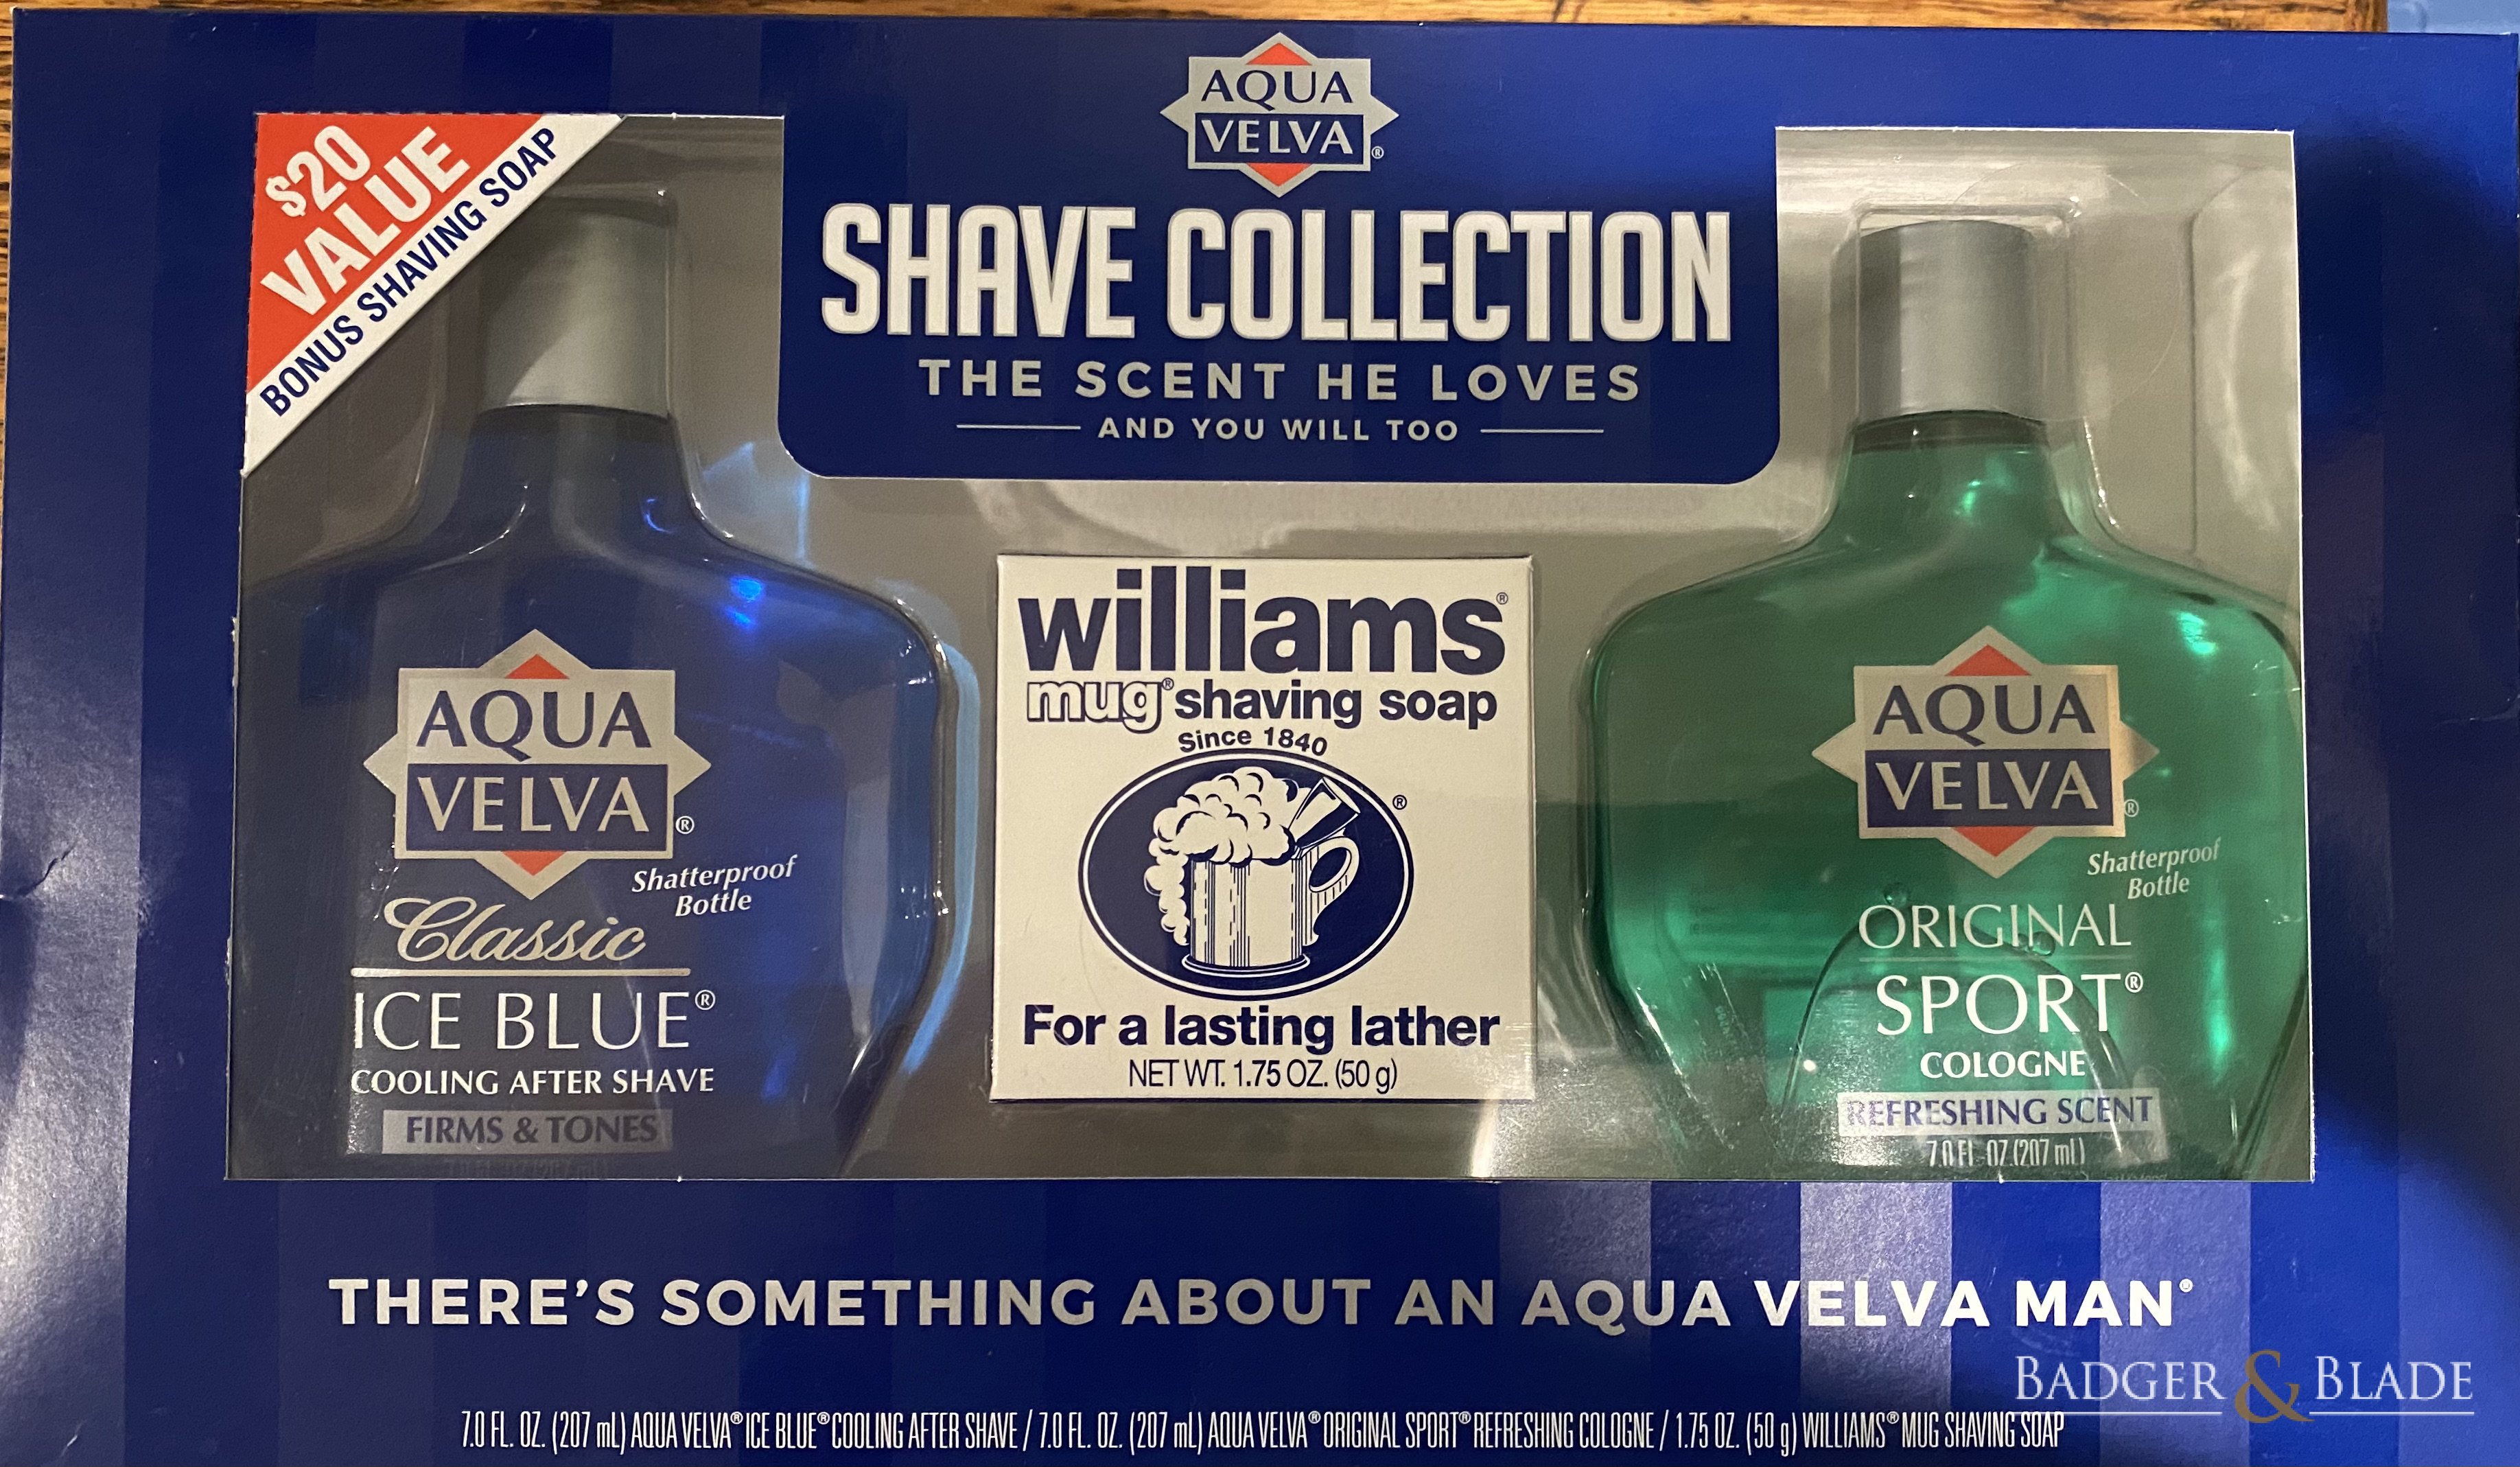 Shave collection